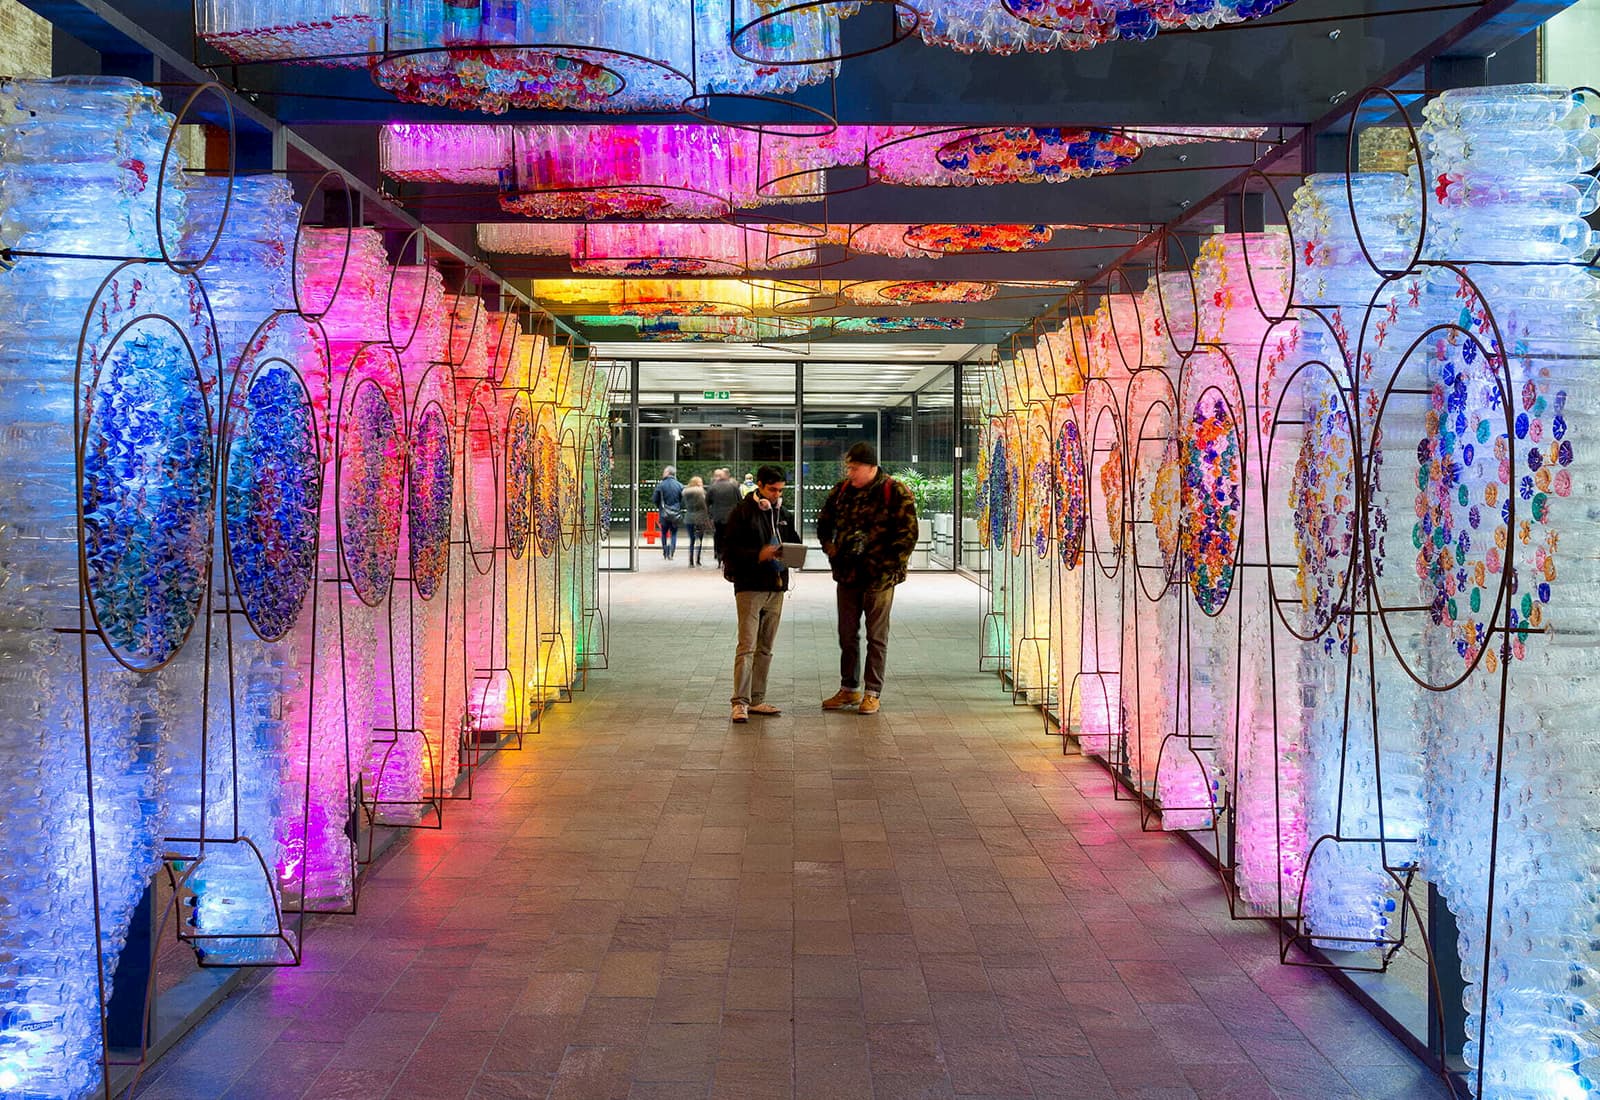 Supported by Bloomberg Philanthropies, "Light City Baltimore" is one of the first large-scale, international light and innovation festivals in the United States.